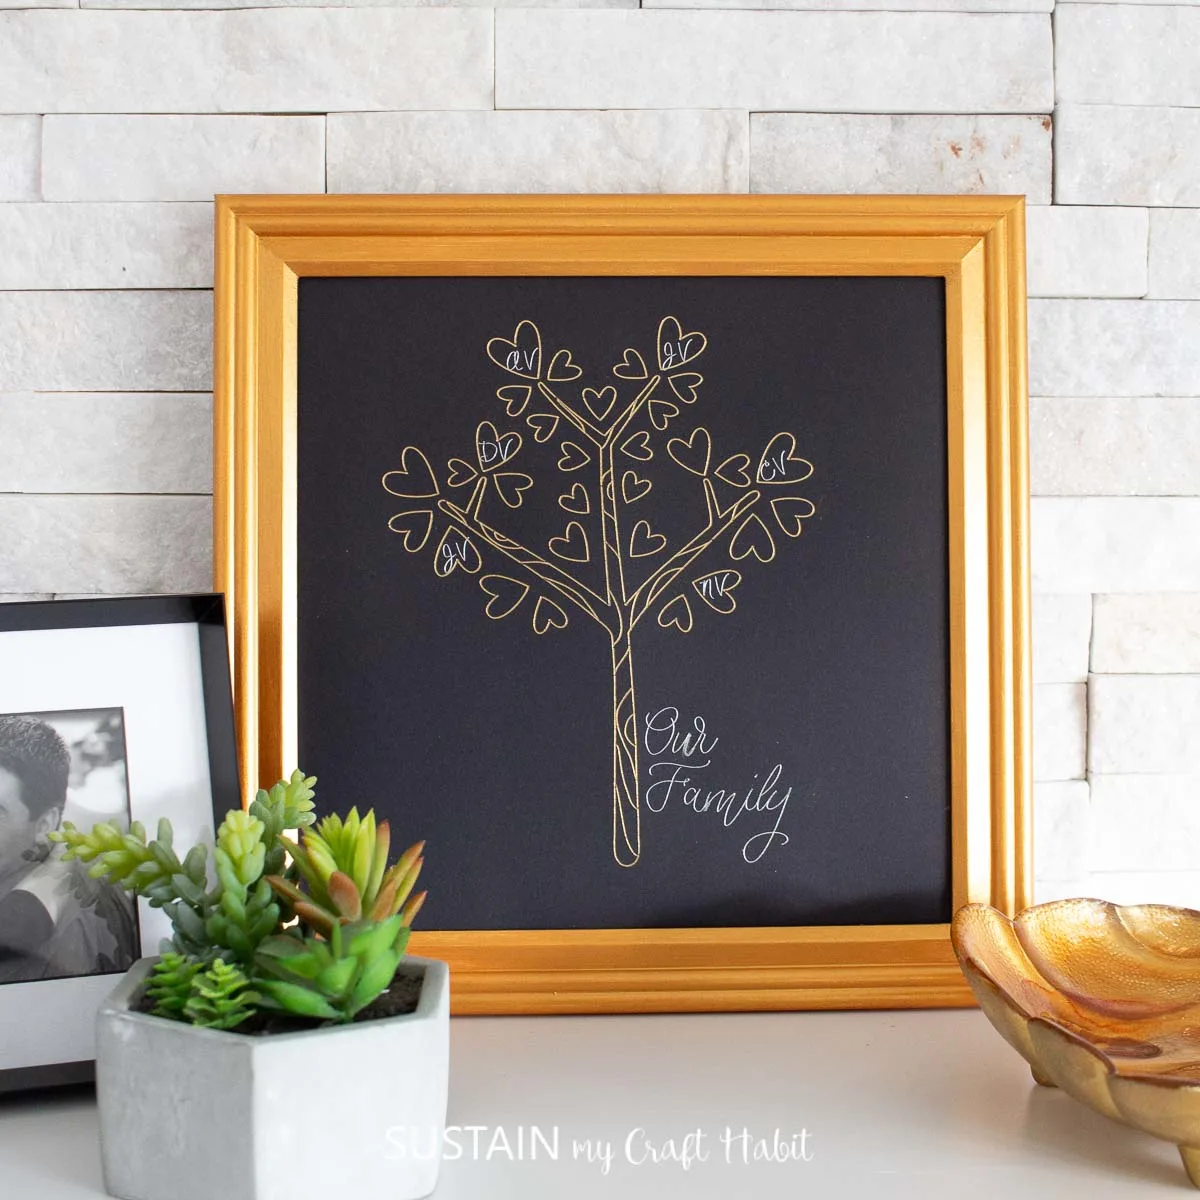 Framed family tree craft resting on a white surface, leaning against a white brick background.